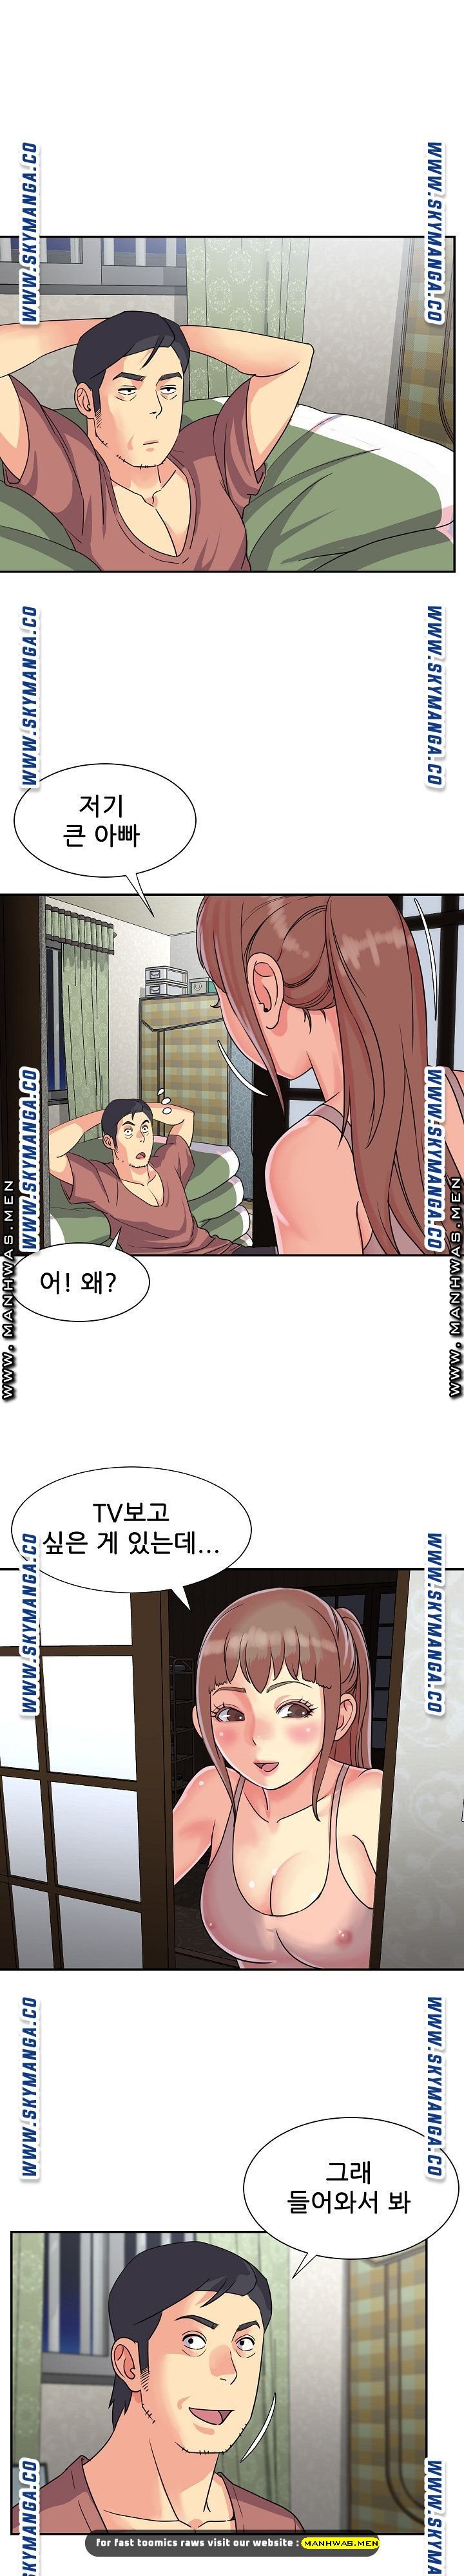 two-sisters-raw-chap-11-10